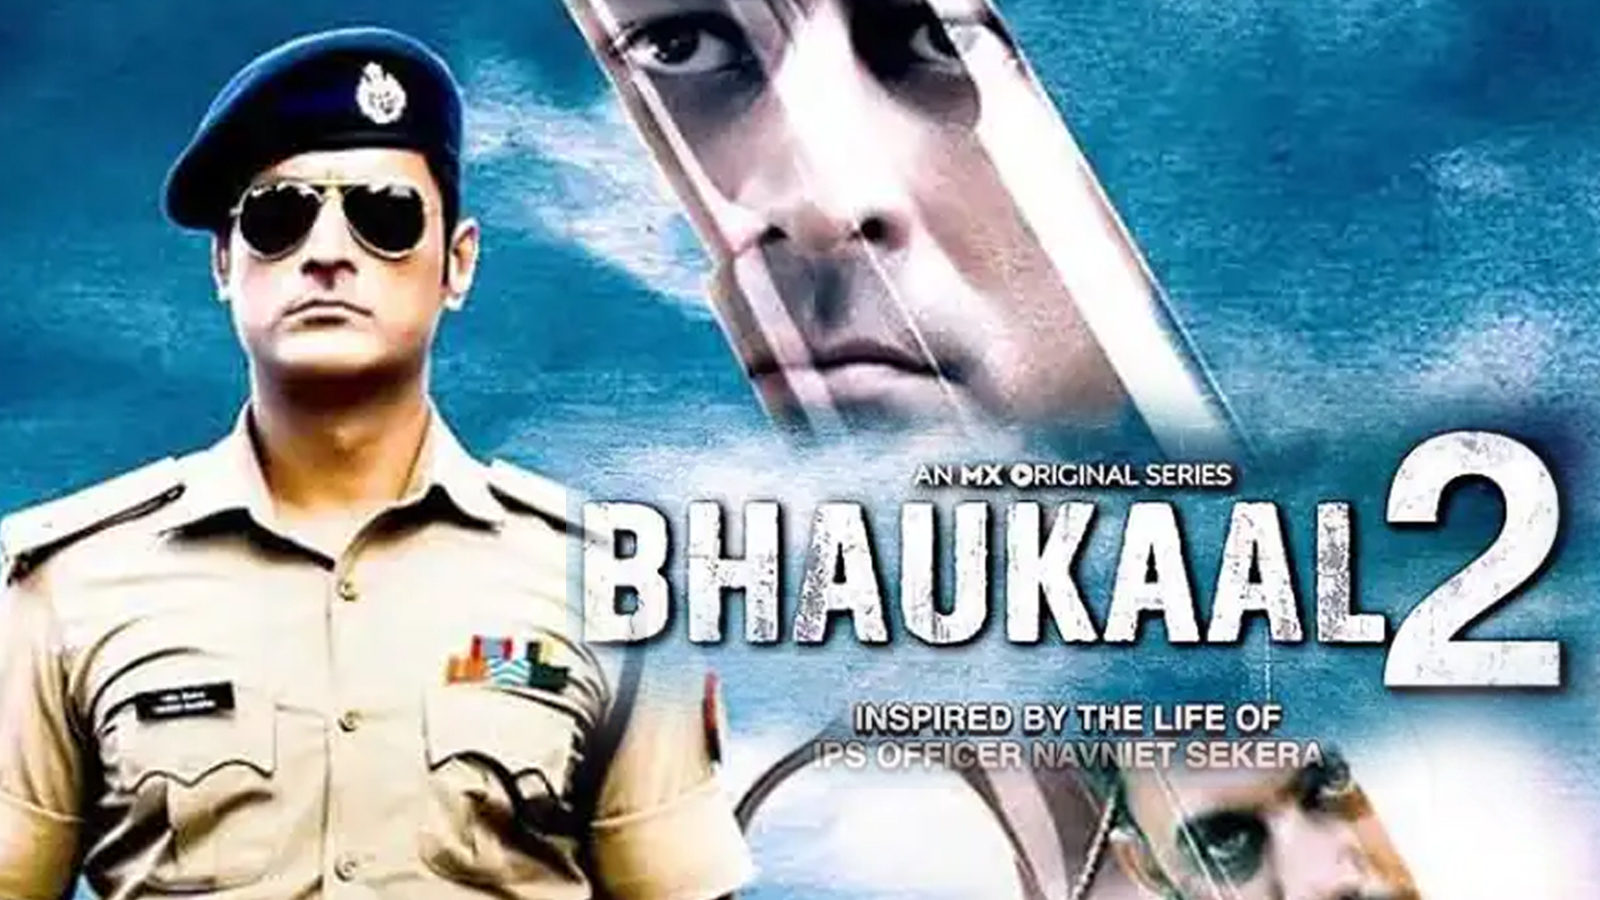 Bhaukaal 2 Review: The second season of ‘Bhaukaal’ has deviated from the target